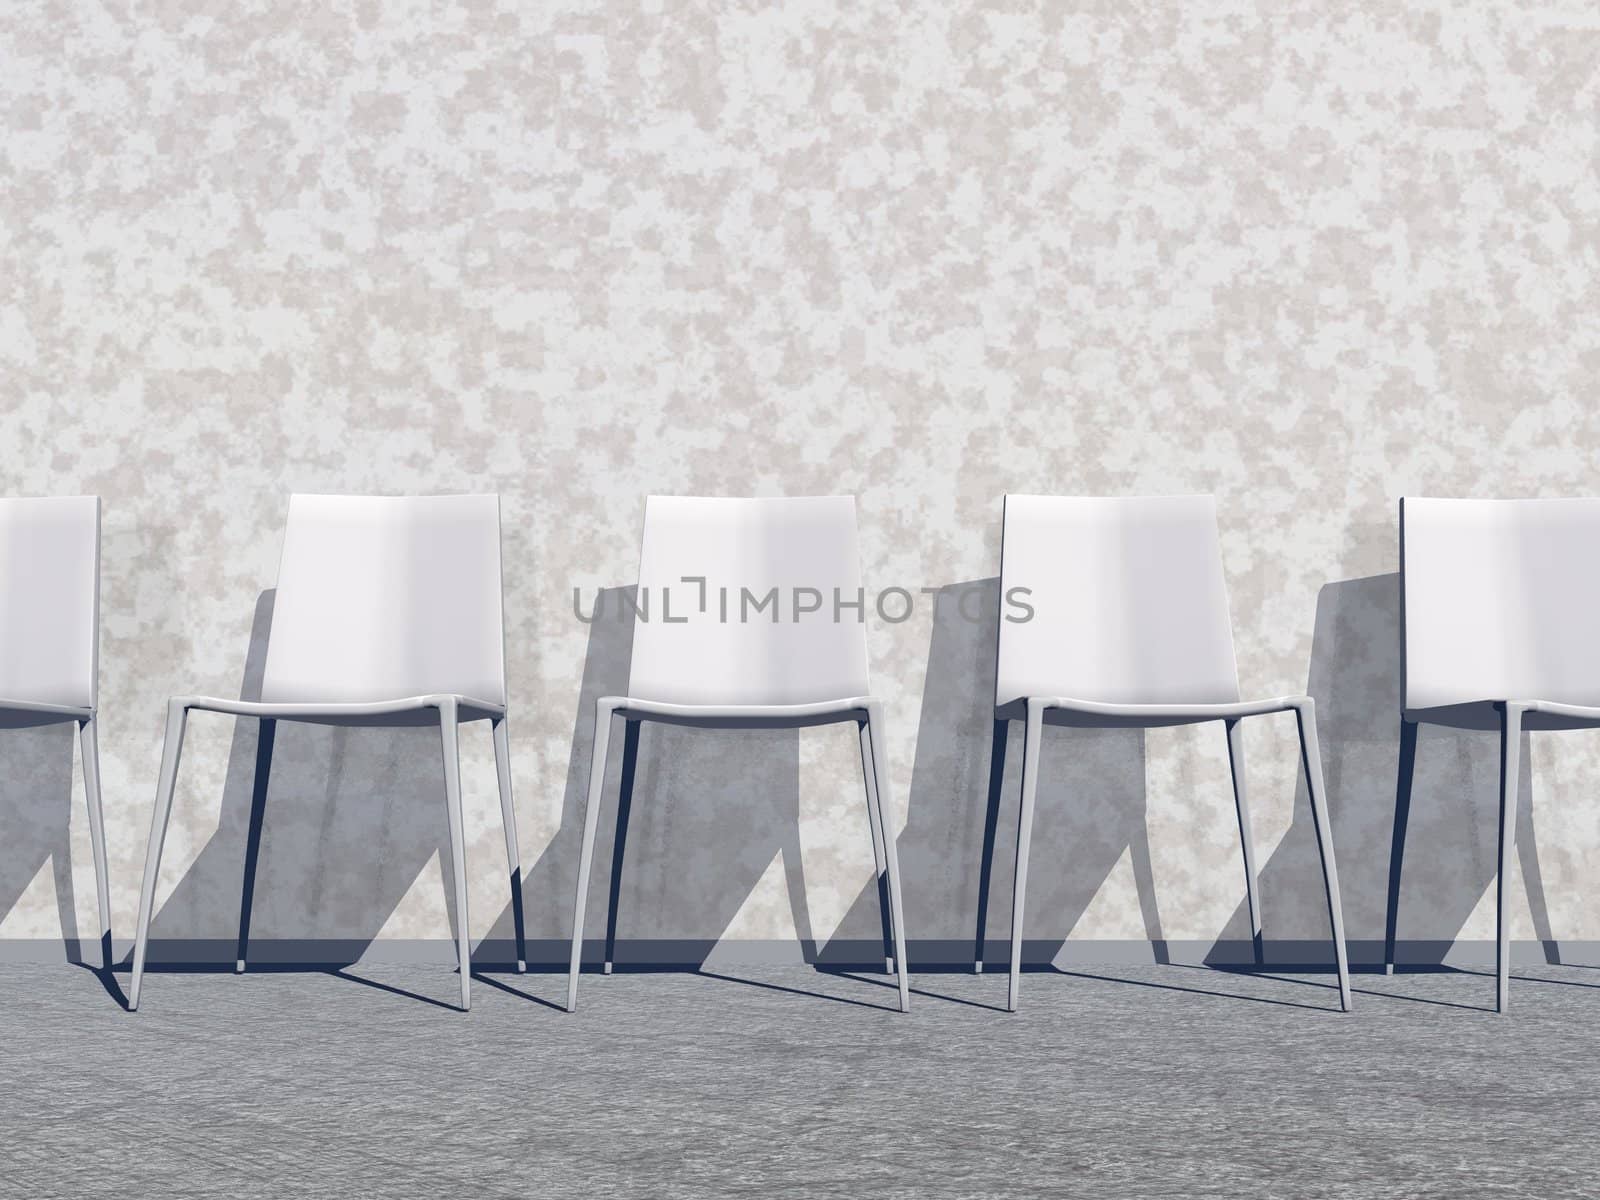 Several white chairs against the wall in a waiting room